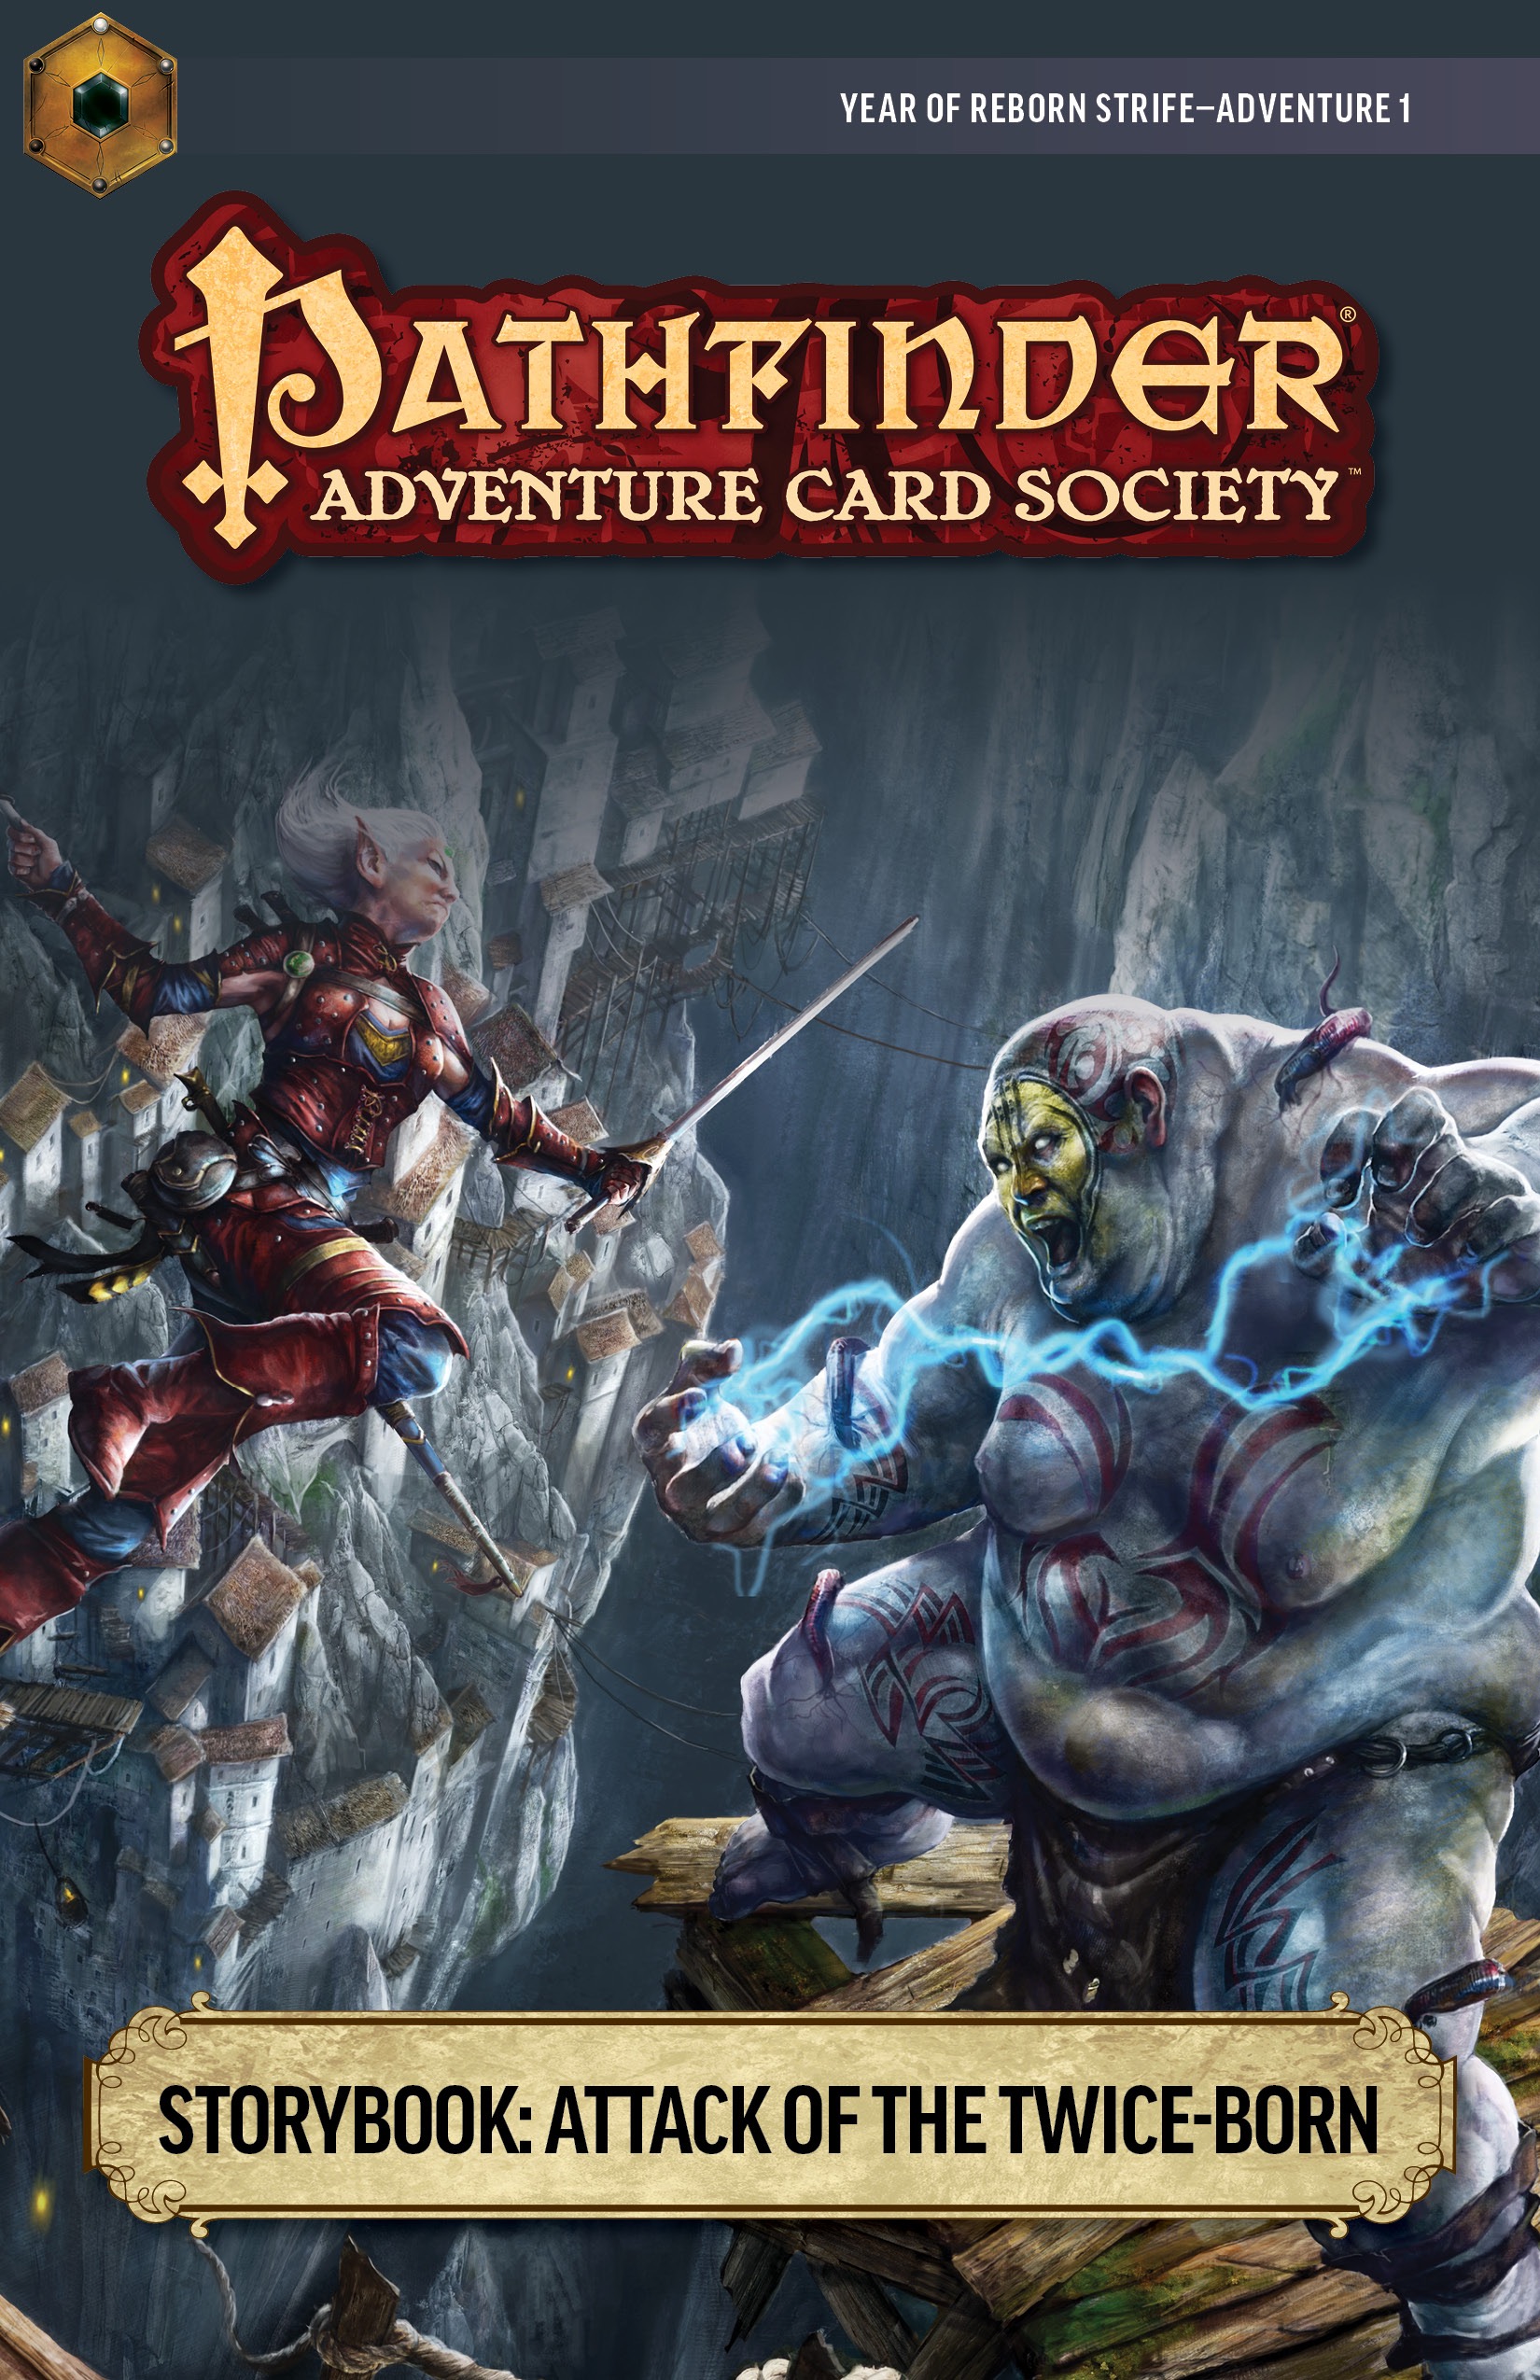 Pathfinder Adventure Cord Society: Attack of the Twice-Born